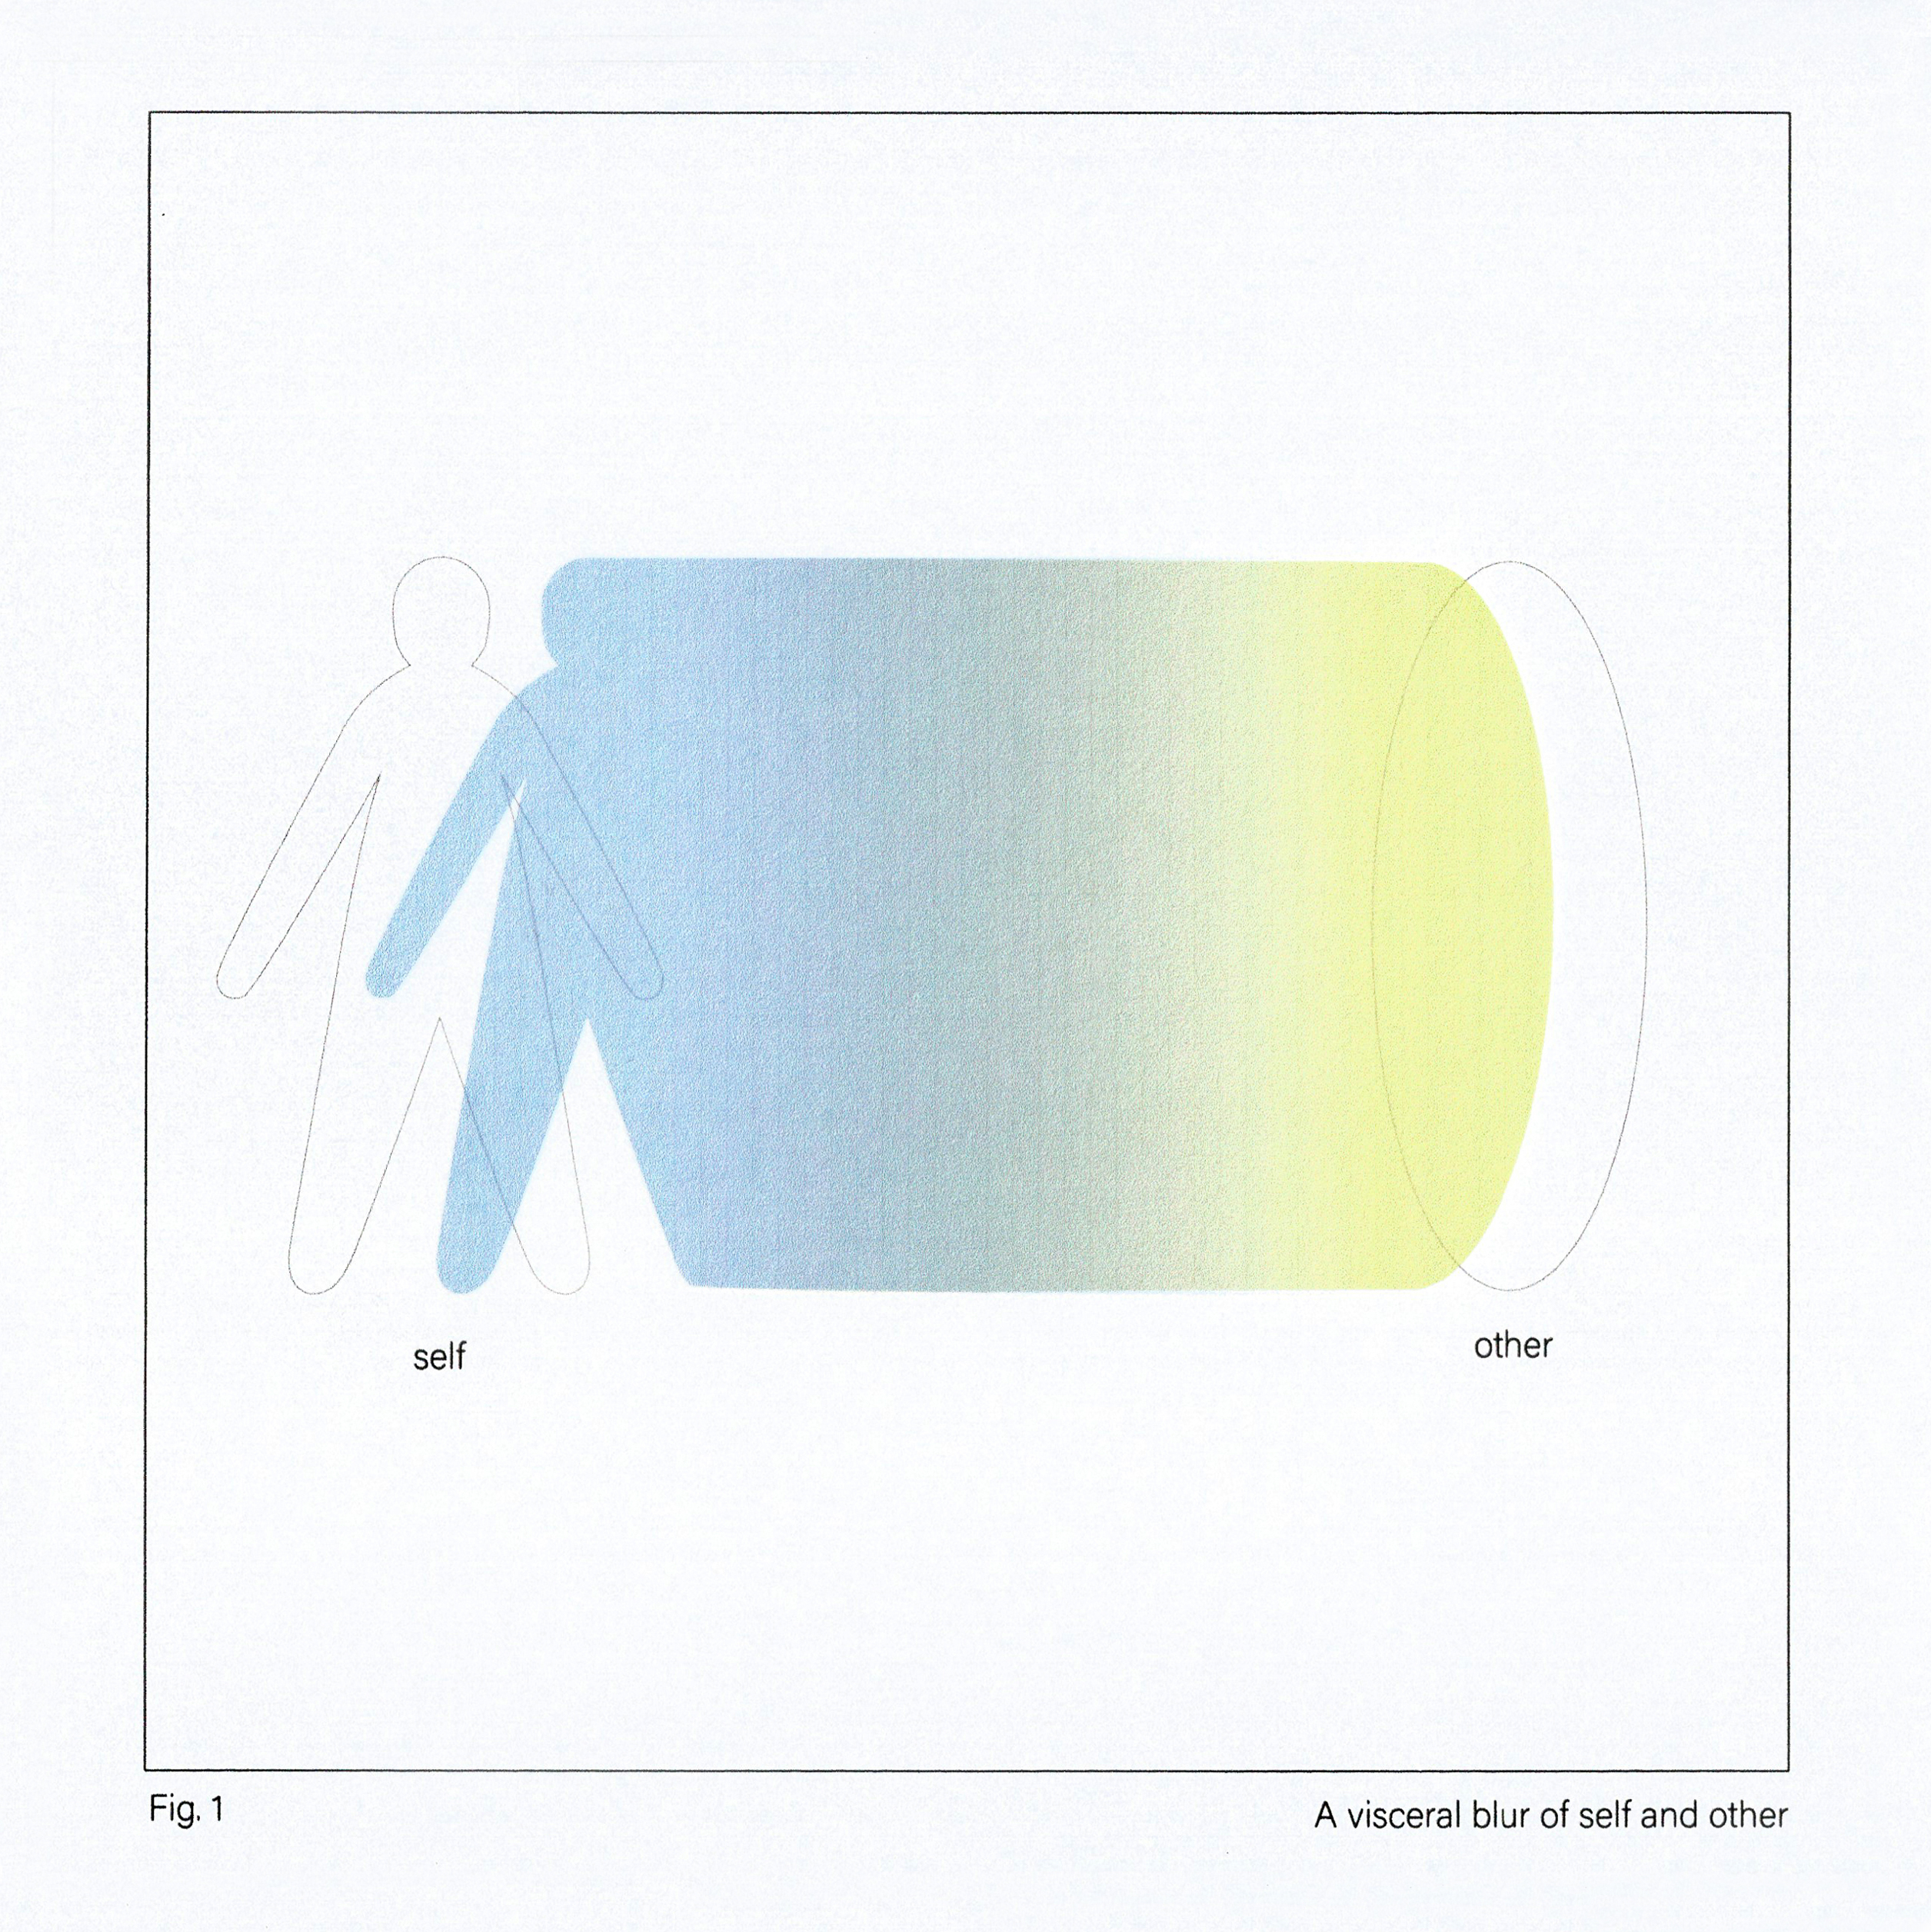 Outline of human body marked "self," blurred from light blue to light yellow into empty oval marked "other."